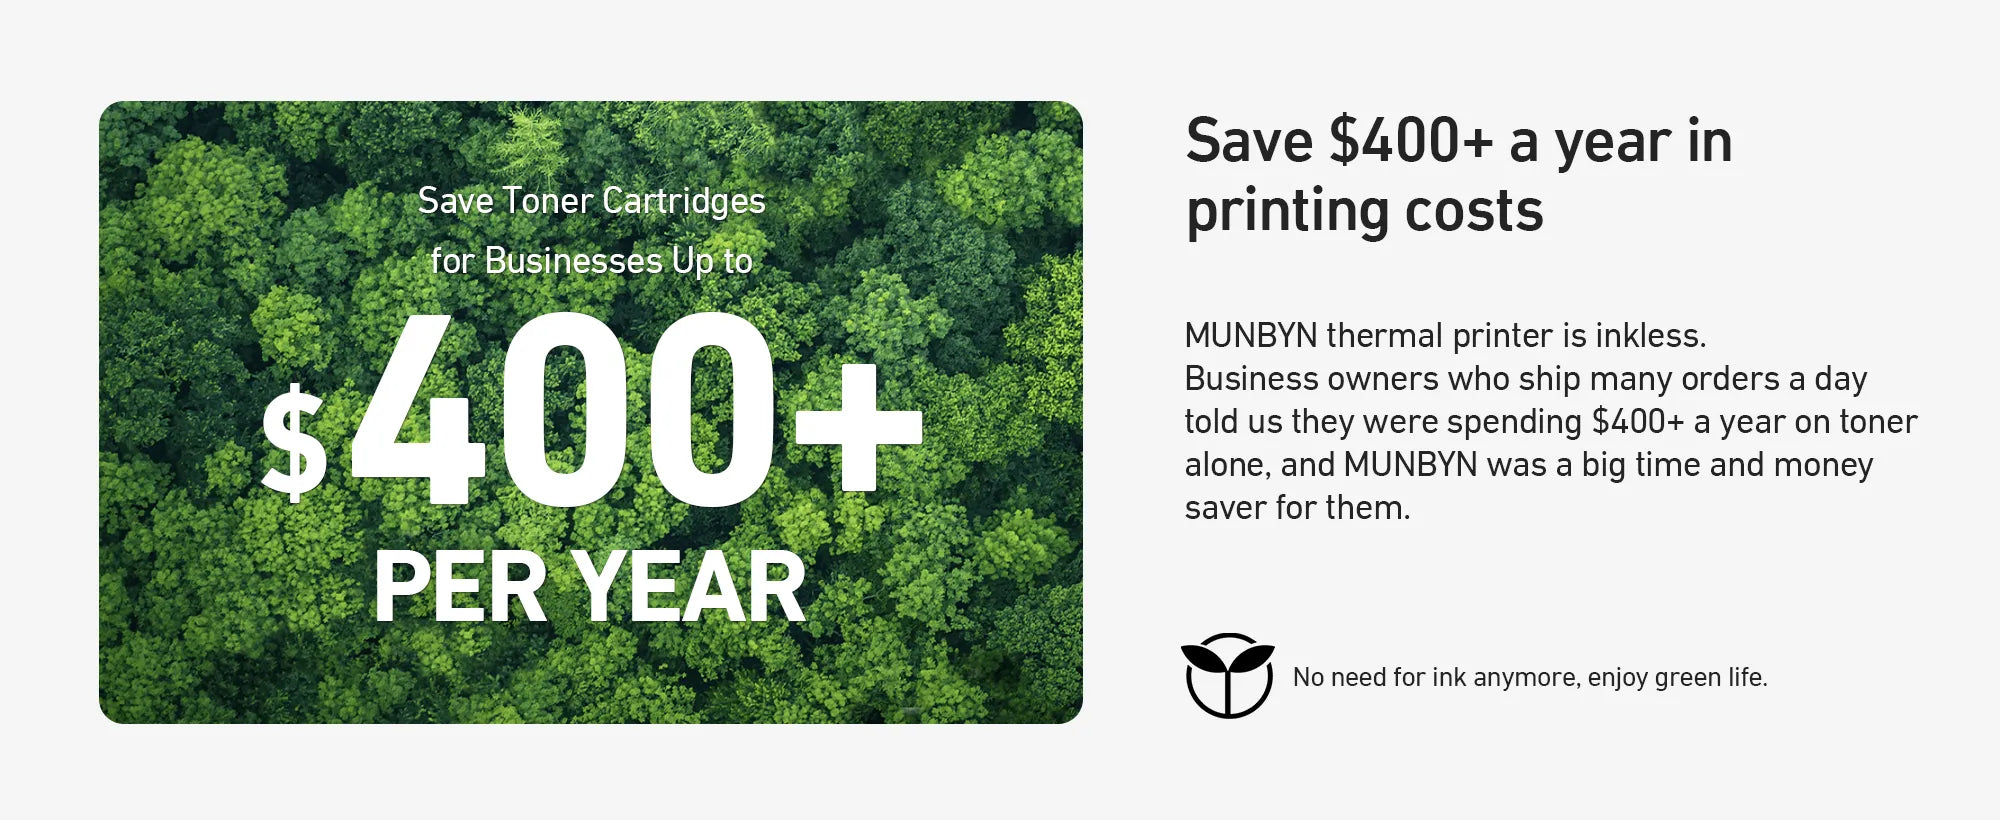 Printing with MUNBYN thermal printers can save $400 per year for small businesses.